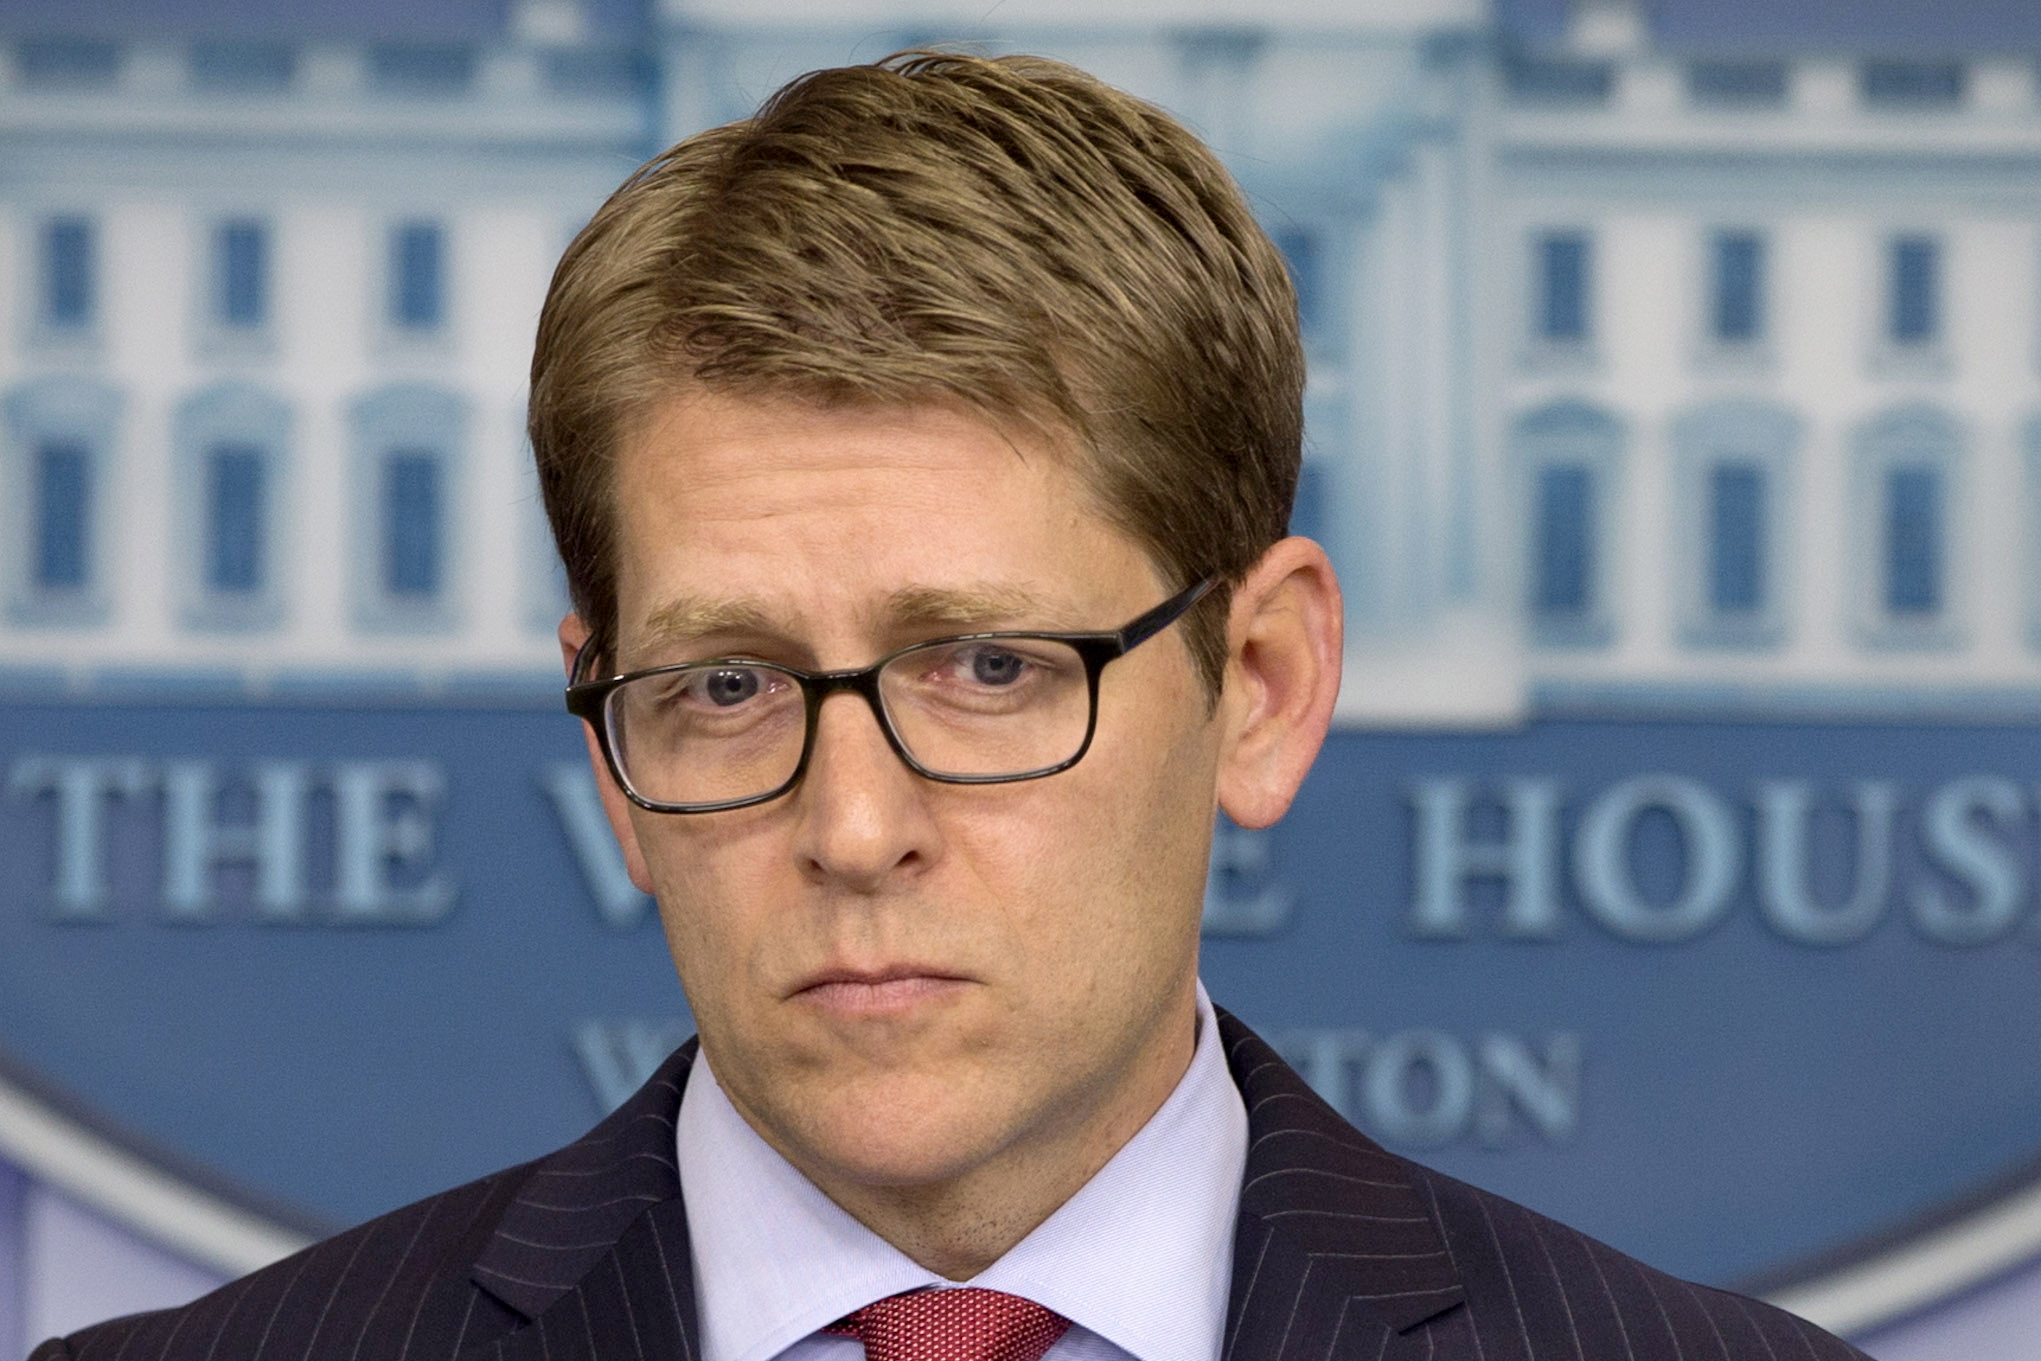 White House press secretary Jay Carney listens to a question from a reporter during his daily news briefing at the White House in Washington as he answers questions about NSA leaker Edward Snowden and Russia.